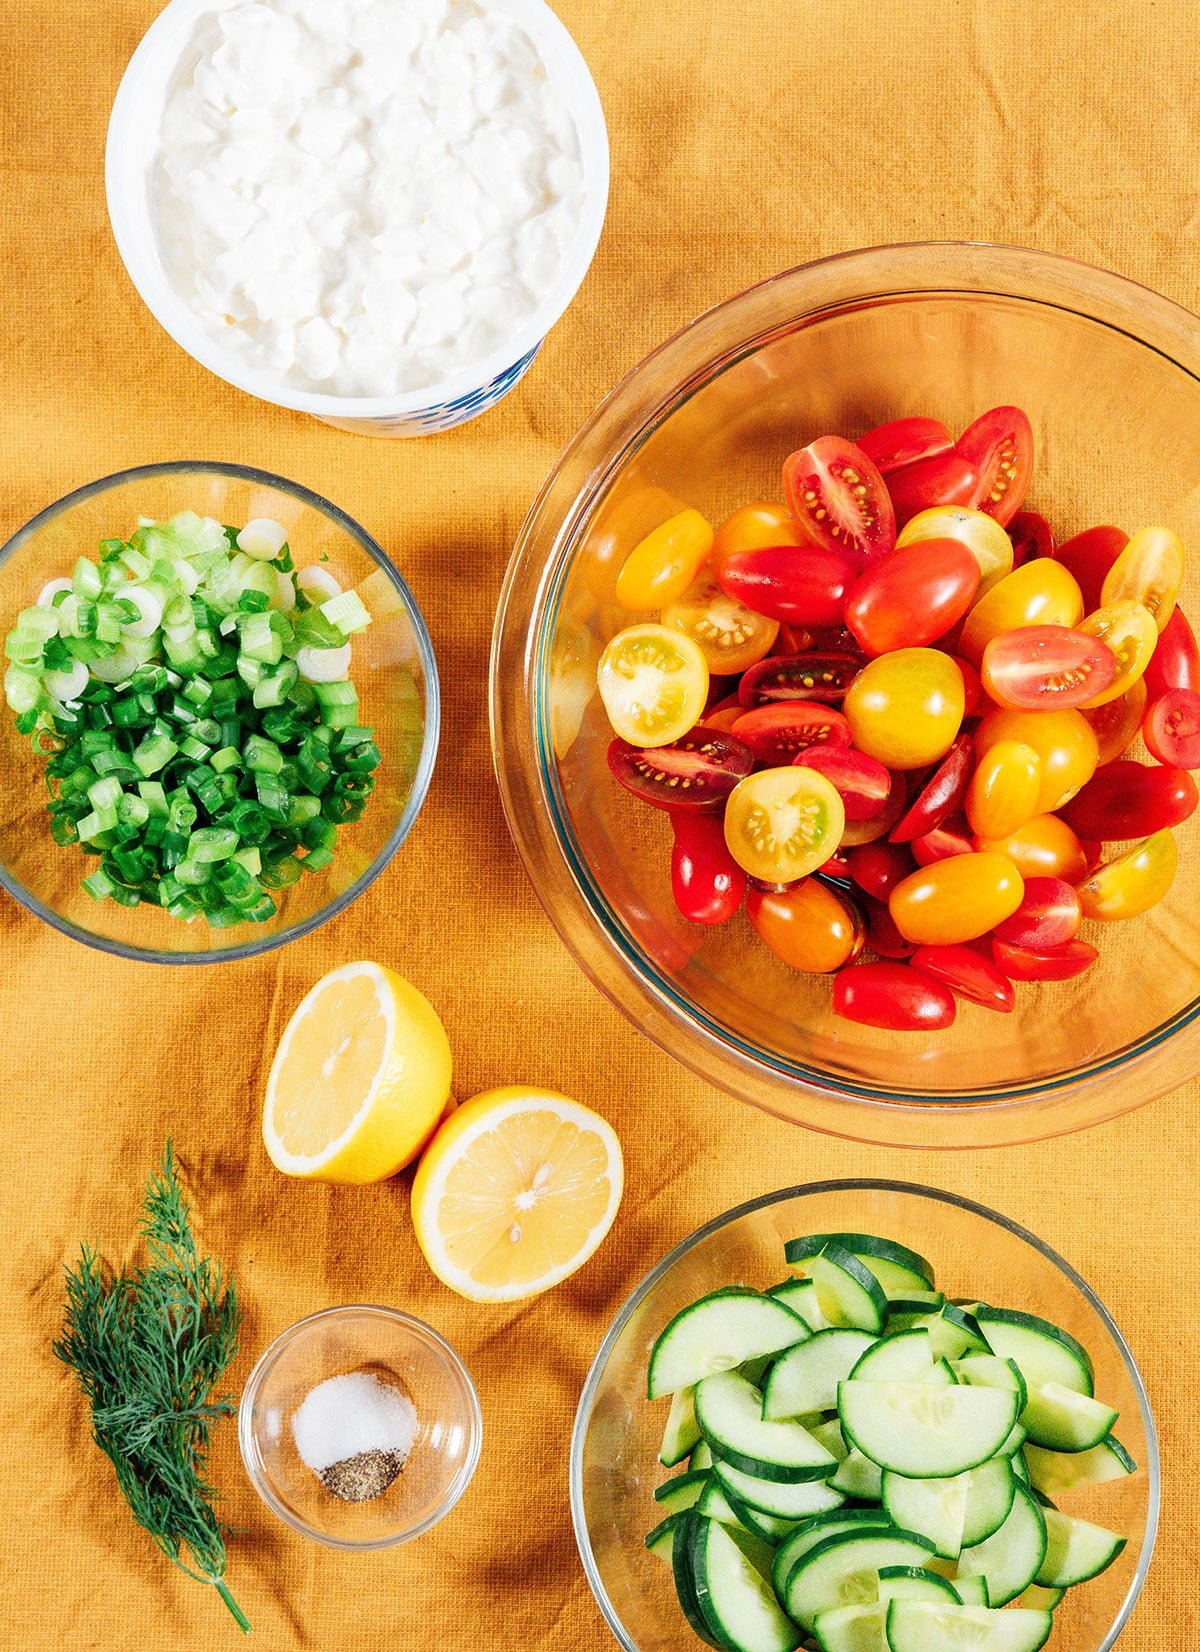 Ingredients to make cottage cheese salad on a yellow tablecloth.